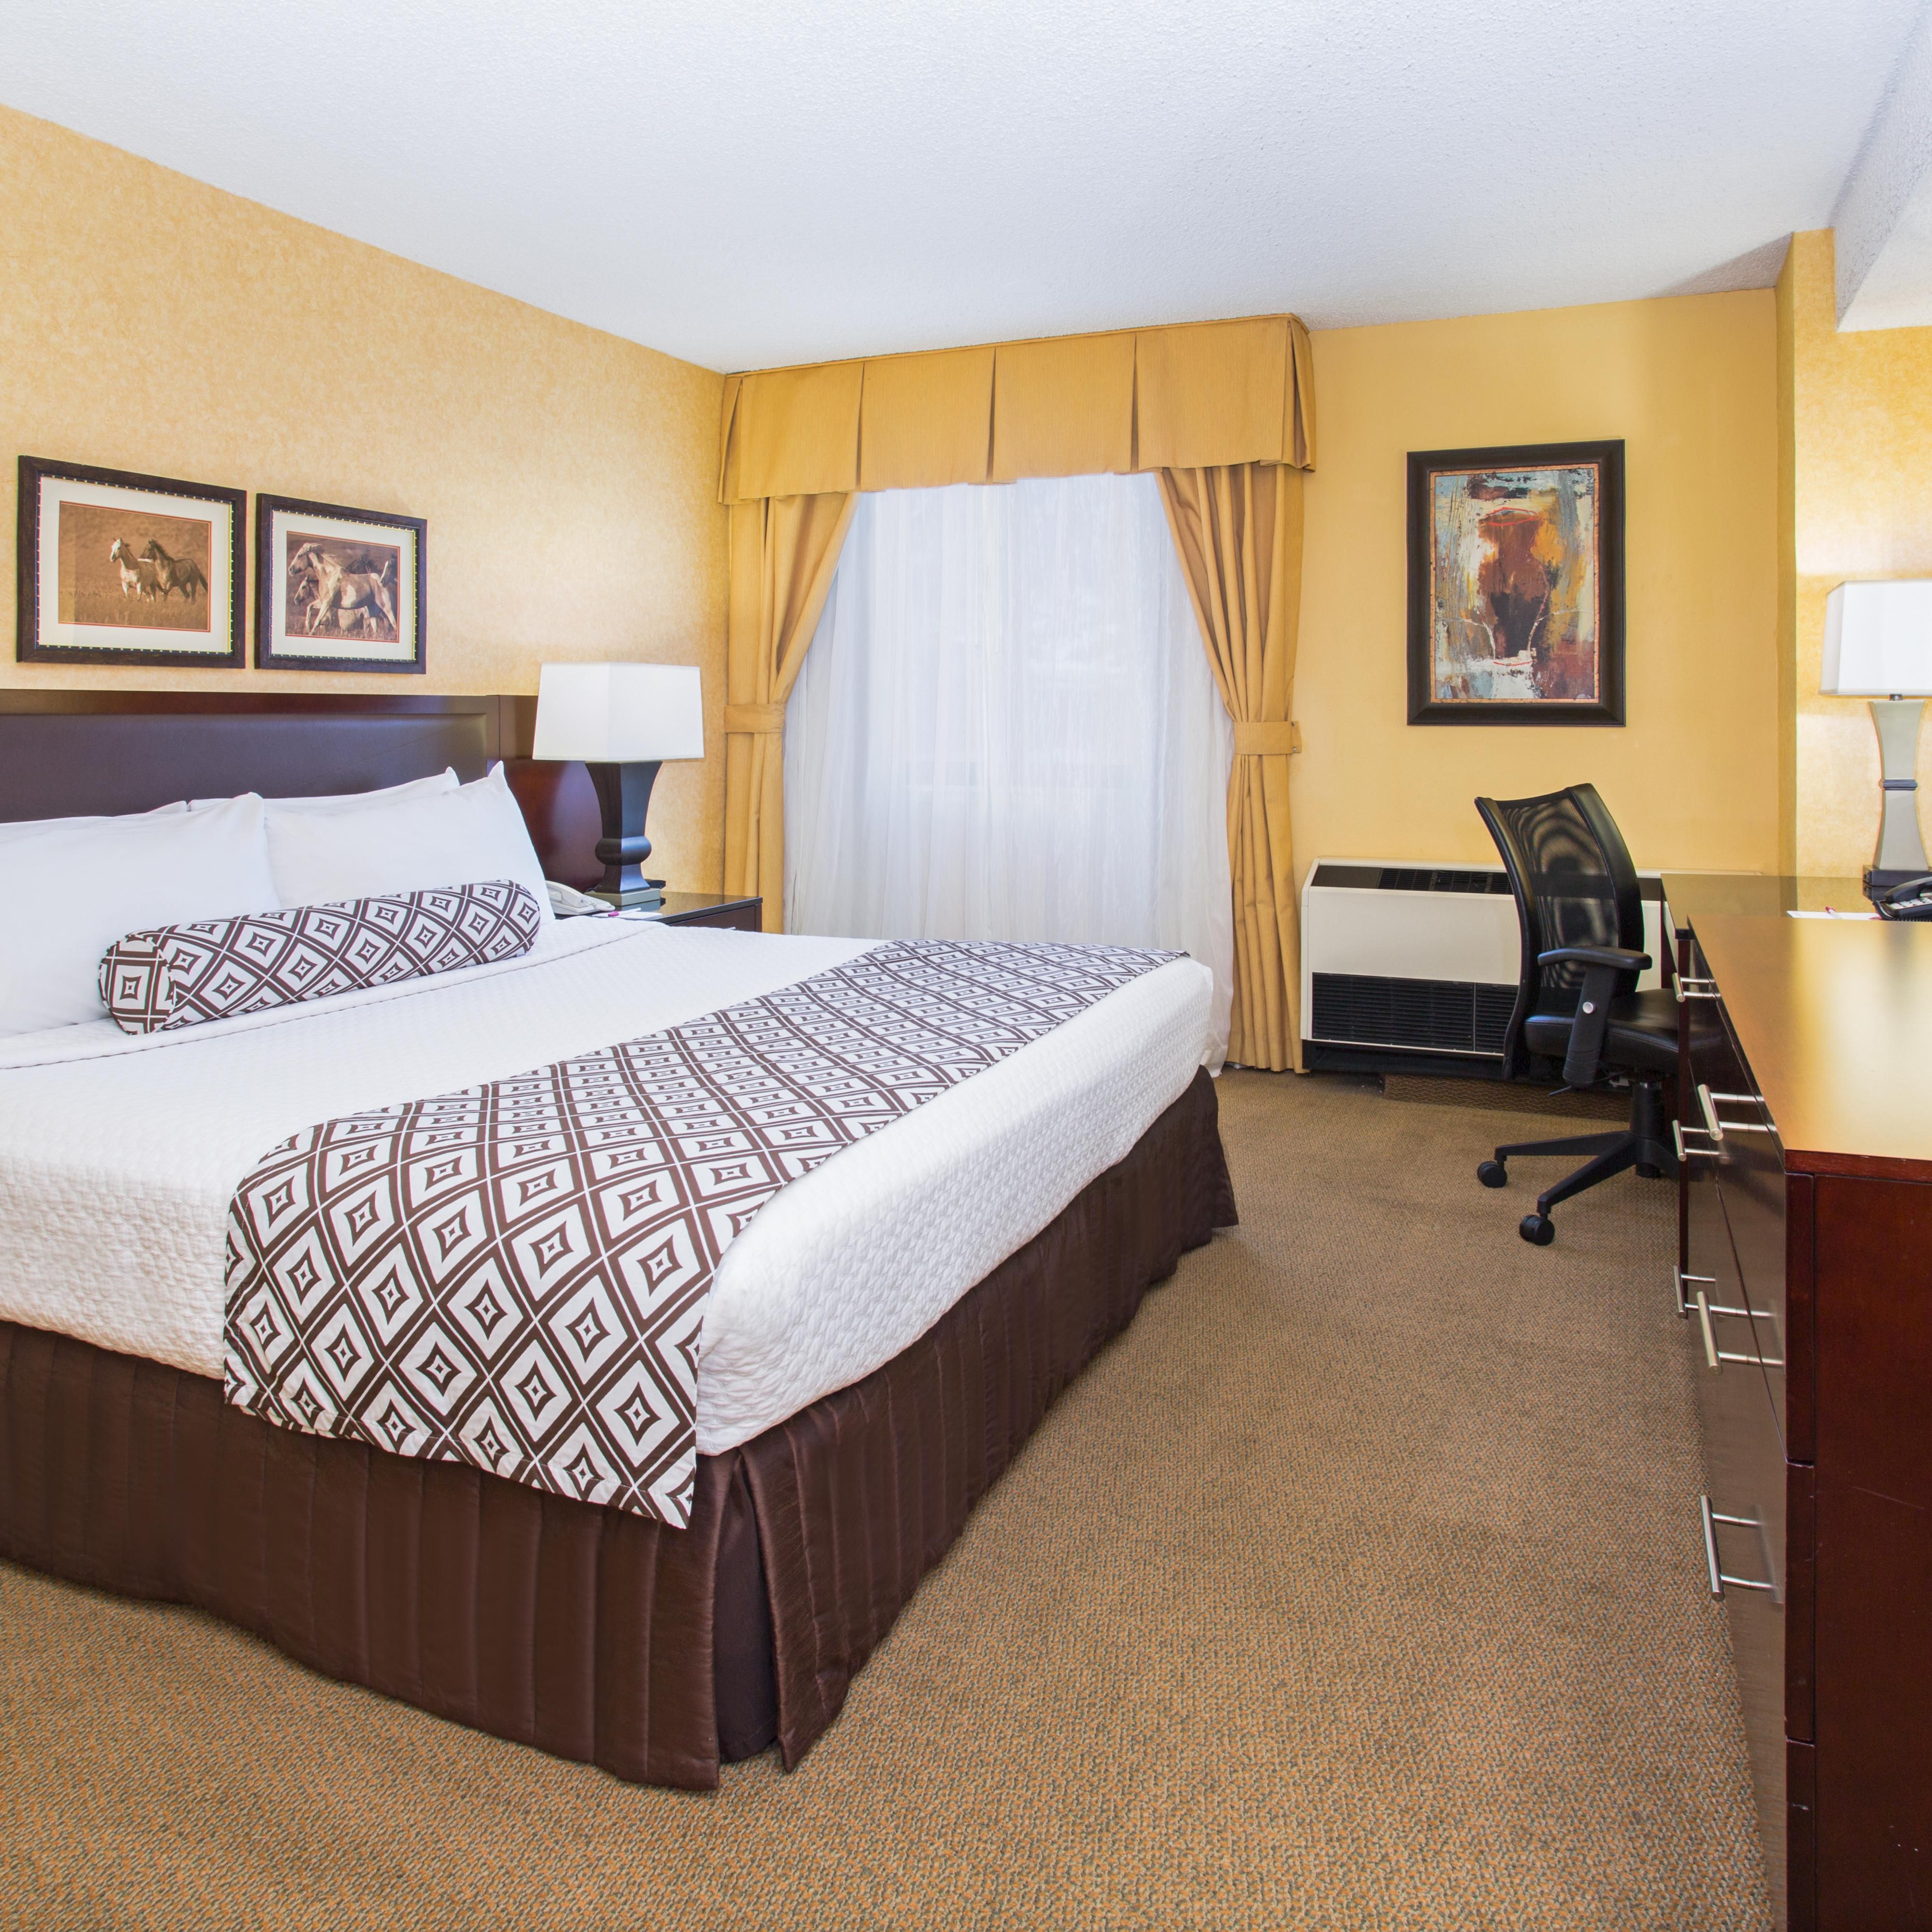 Our king rooms are designed for corporate &amp; leisure traveler alike